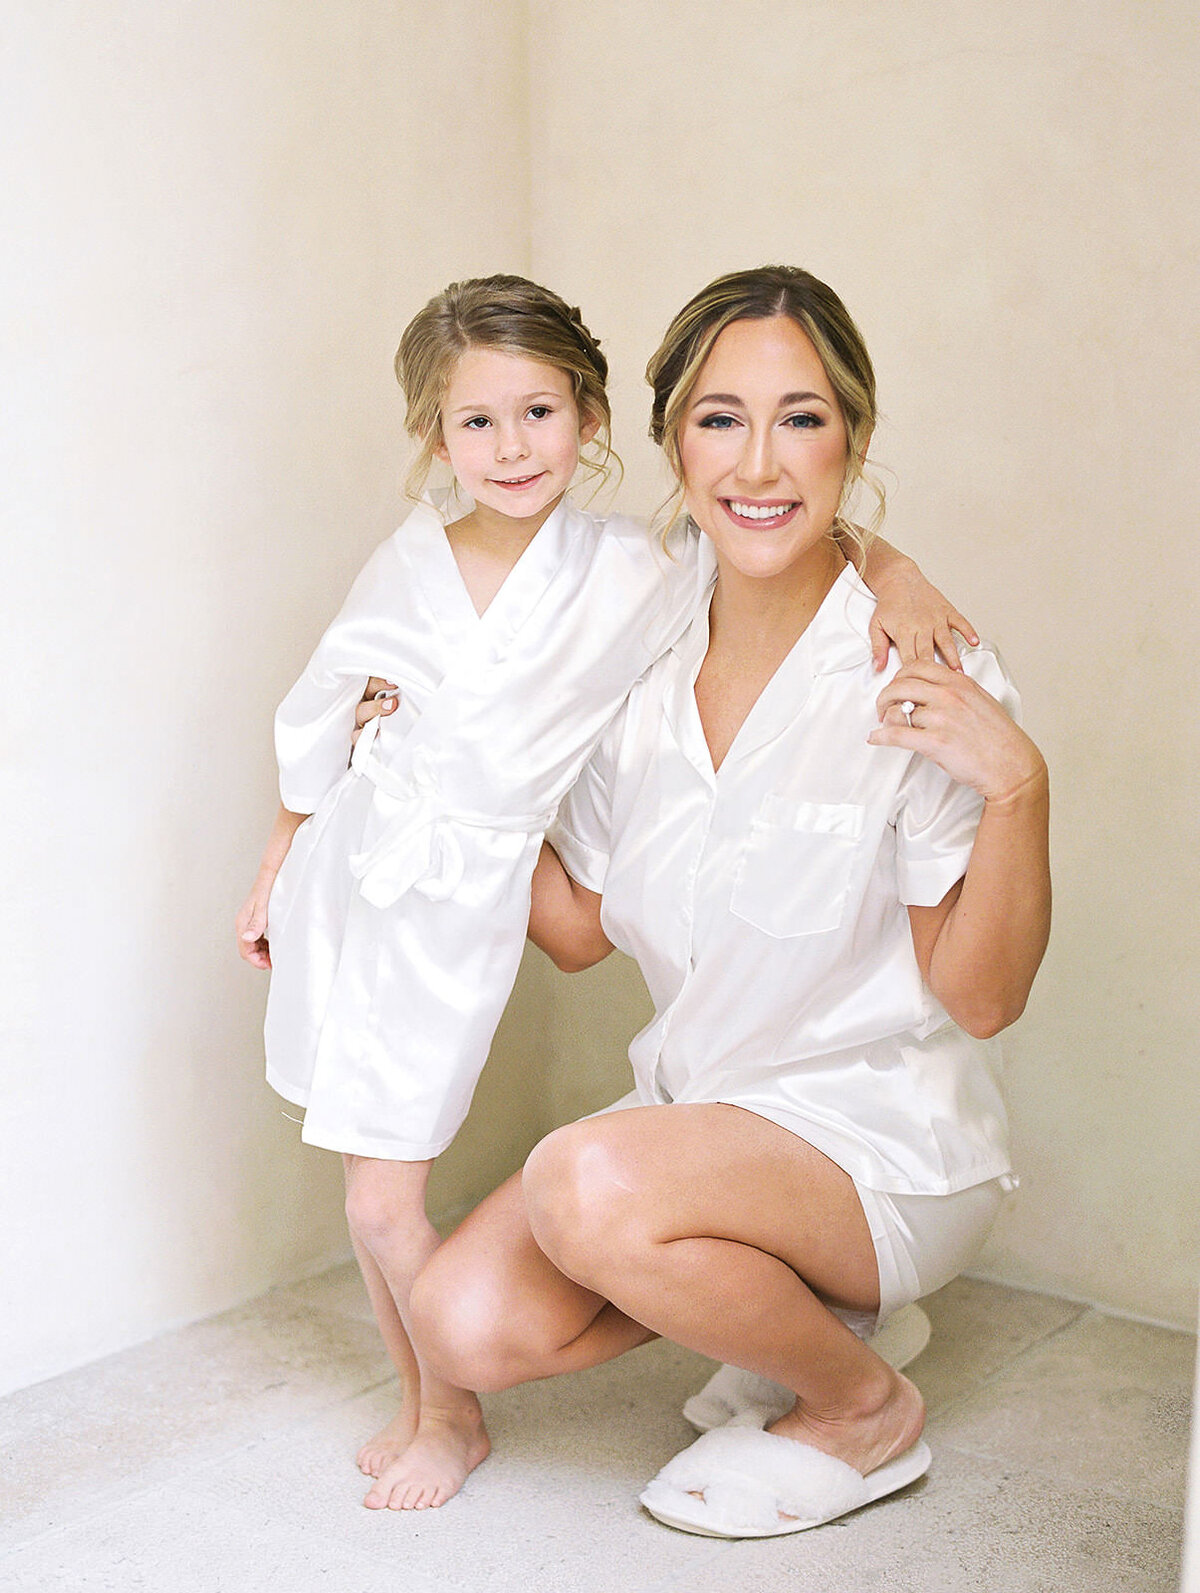 A bride and her flowergirl pose together in pajamas against a neutral wall